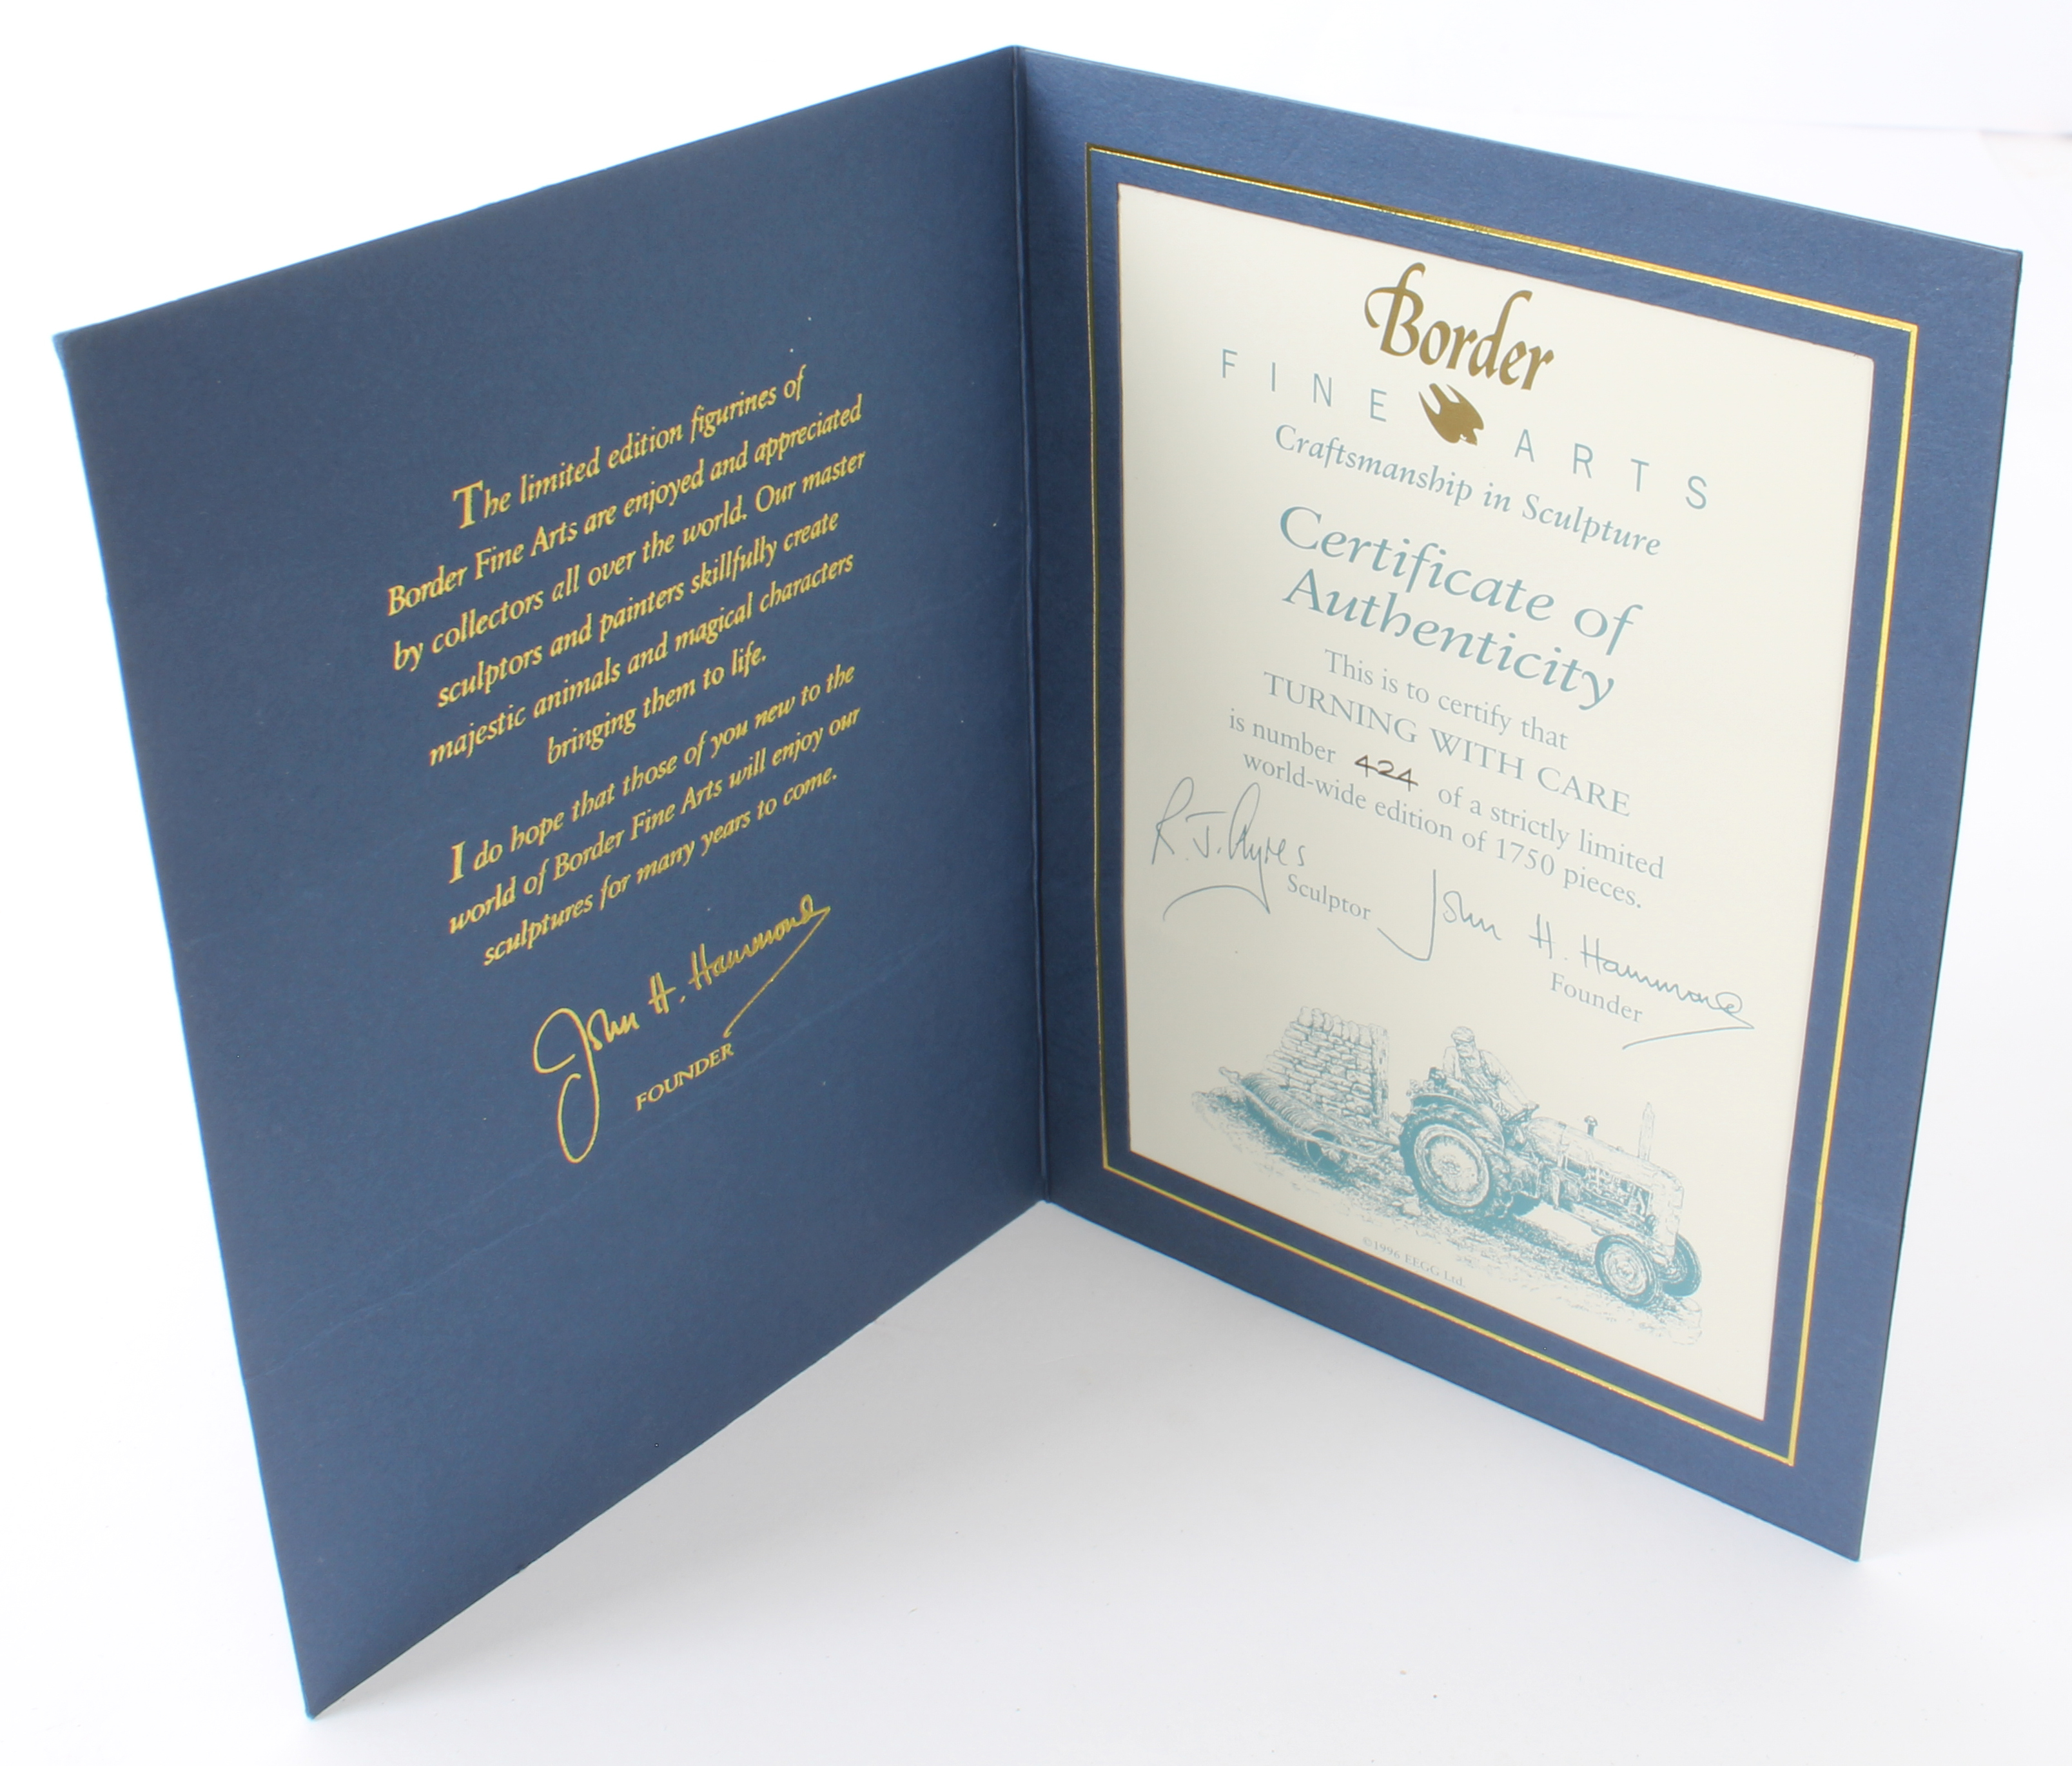 A Border Fine Arts limited edition model, 'Turning with Care', with certificate of authenticity - Image 5 of 5